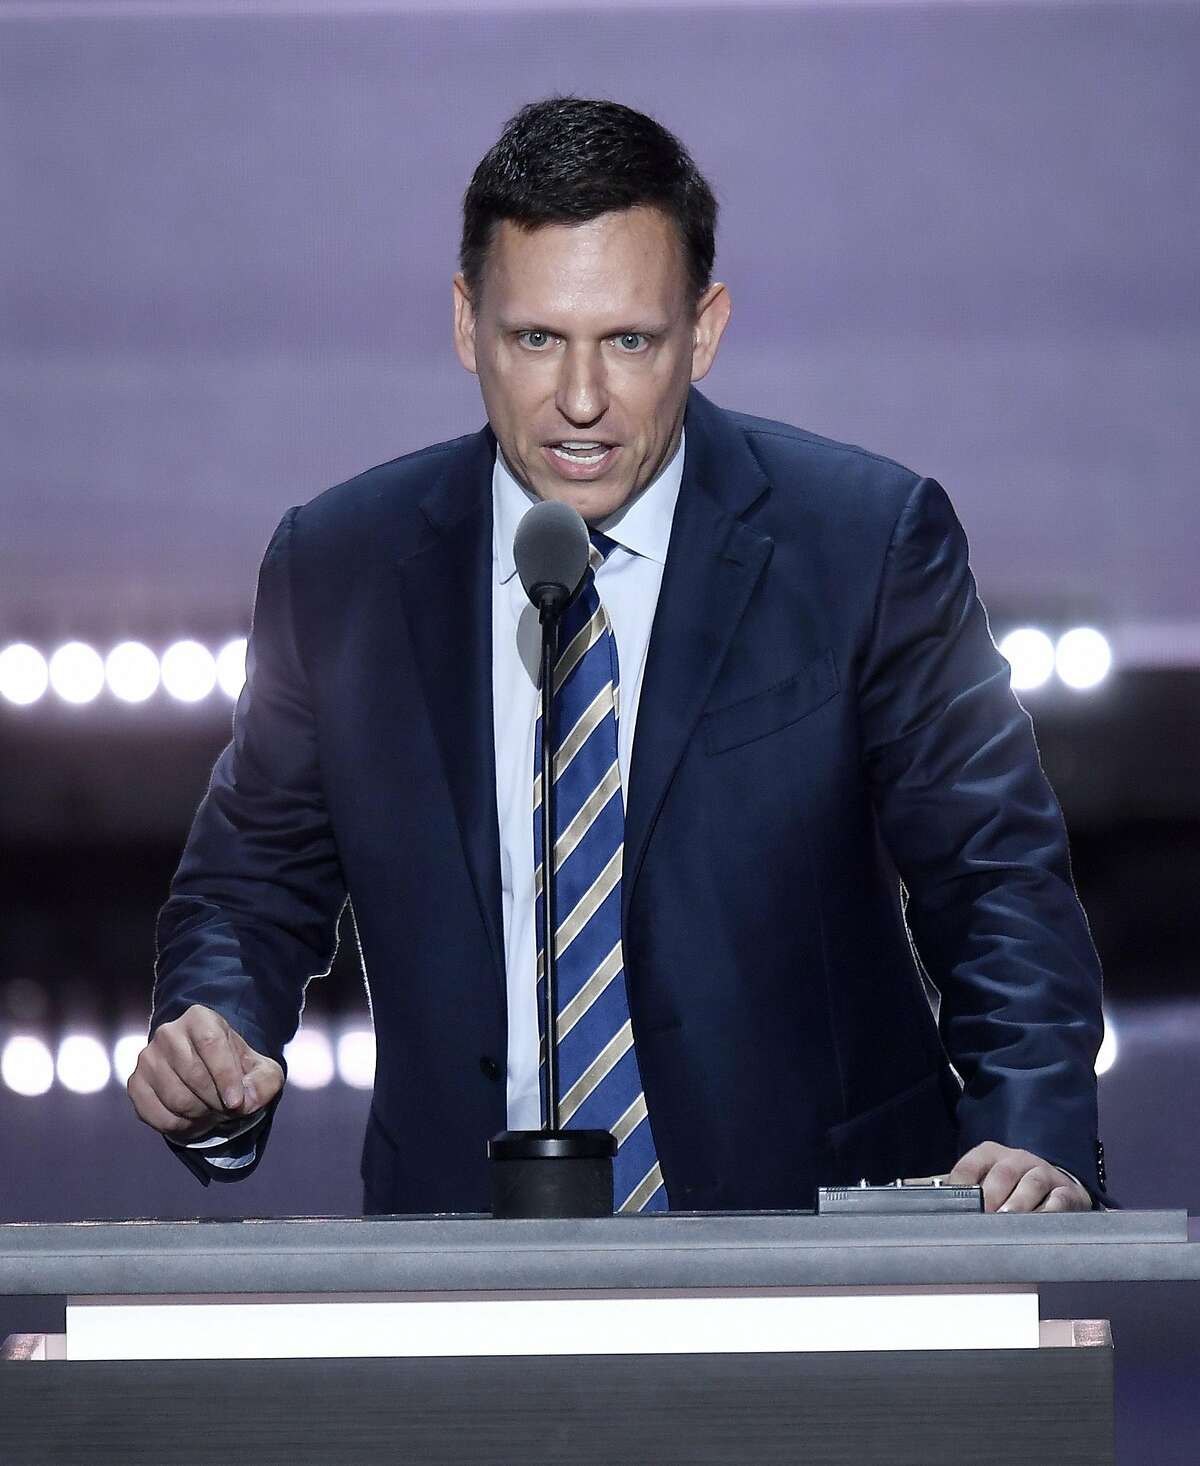 Silicon Valley activists are targeting Peter Thiel, because the controversial venture capitalist and a board member for Facebook donated $1.25 million to a super PAC that supports Donald Trump.